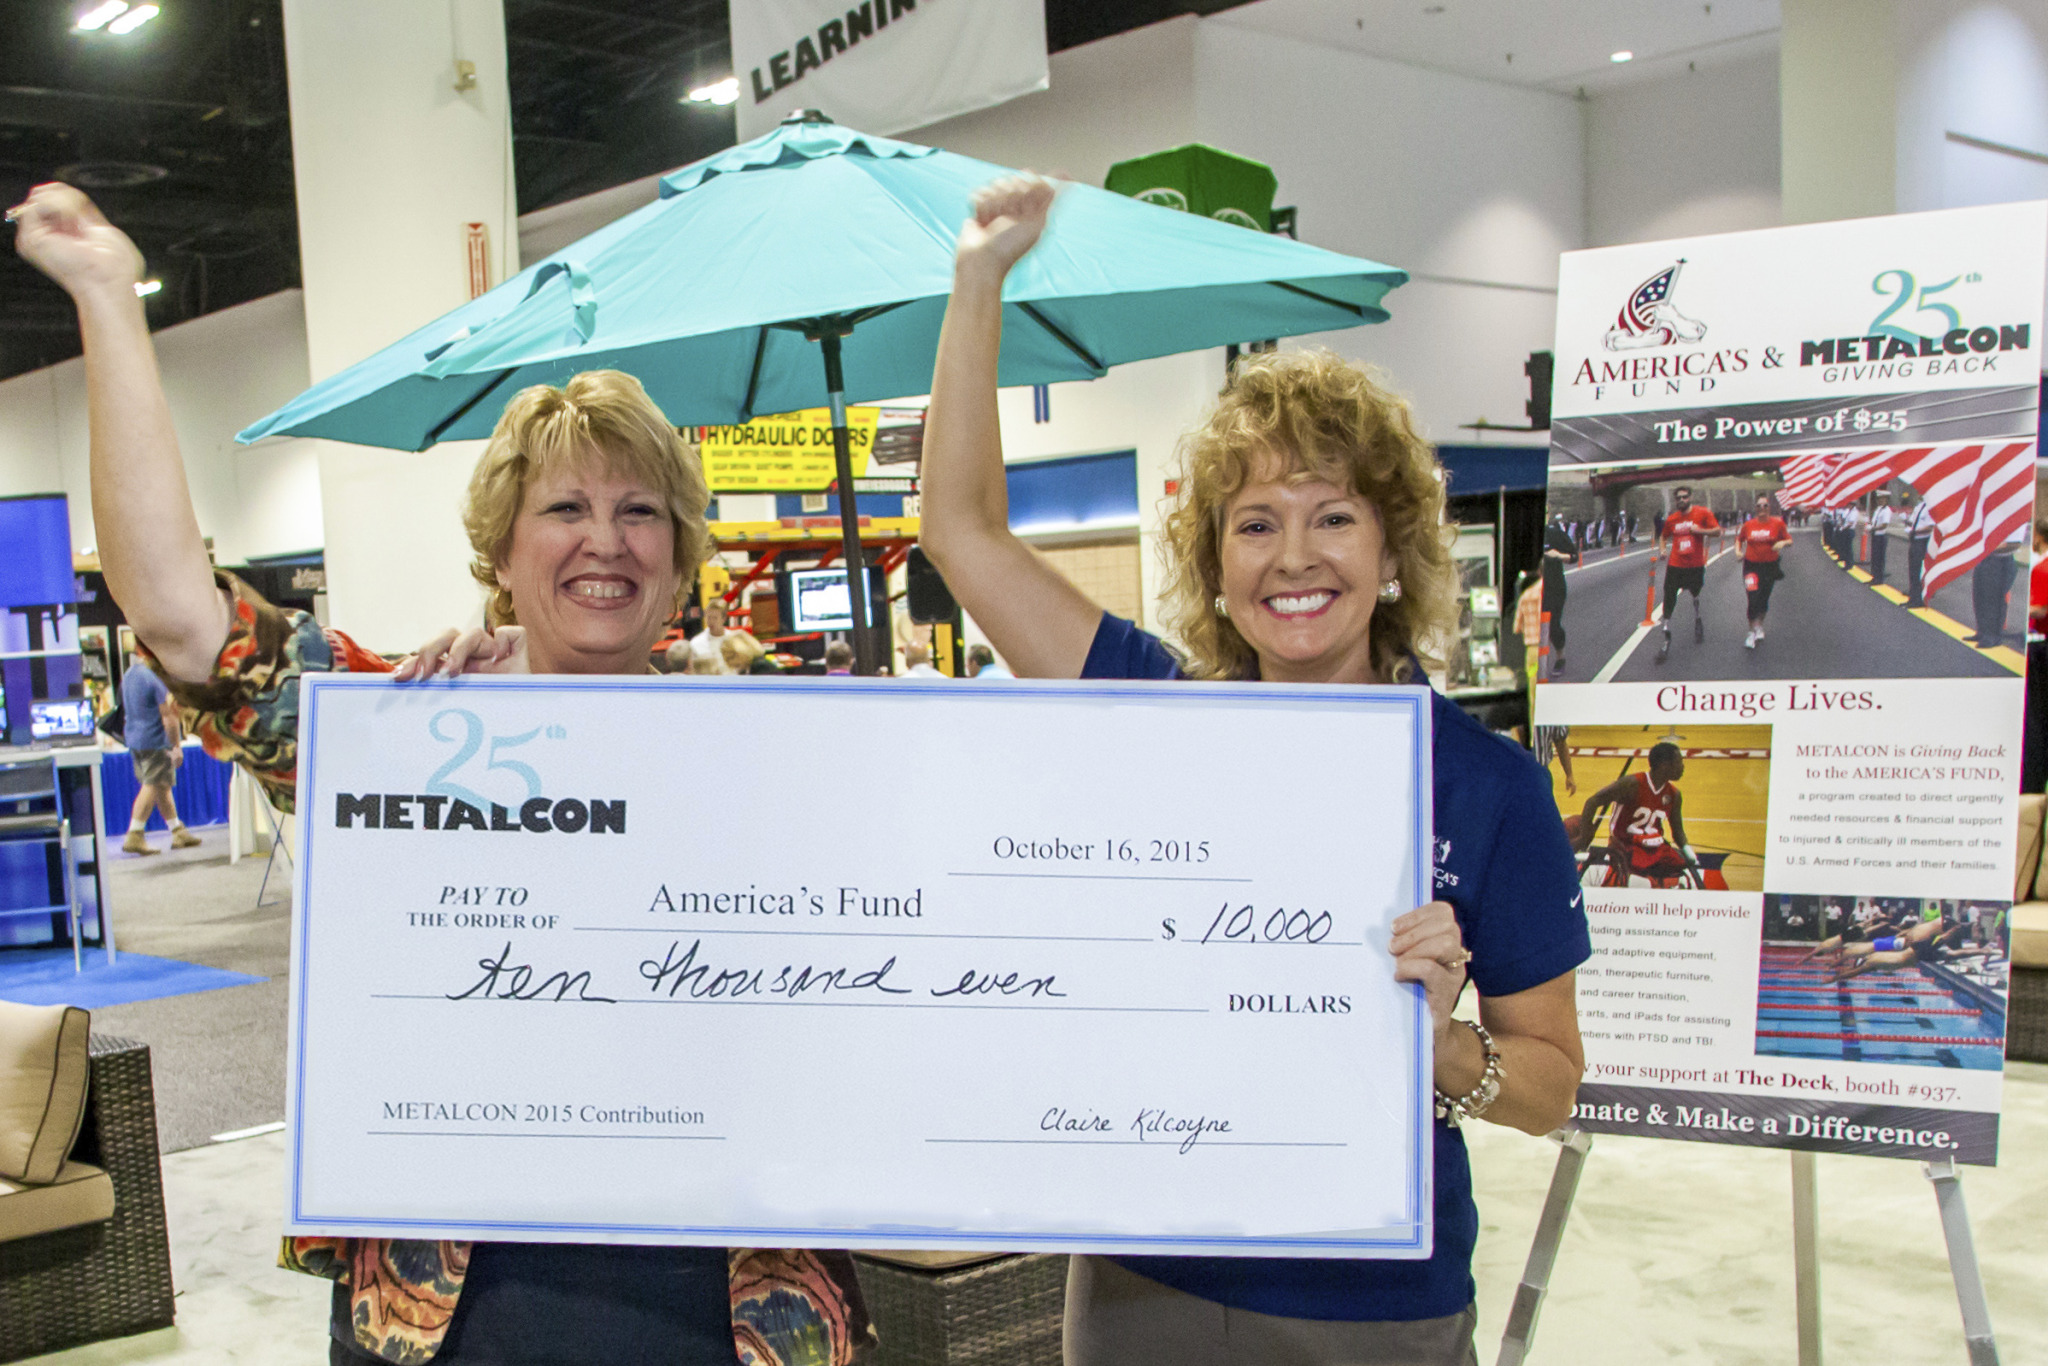 Diane Layman (left), voluntary services specialist for the Tampa Polytrauma Rehabilitation Center, and Debra Jordan, East Coast case manager for America’s Fund, are ecstatic to receive a $10,000 check from METALCON Show Director Claire Kilcoyne. Funds were raised at the 2015 METALCON through contributions from exhibitors, attendees, show management, show vendors and staff.